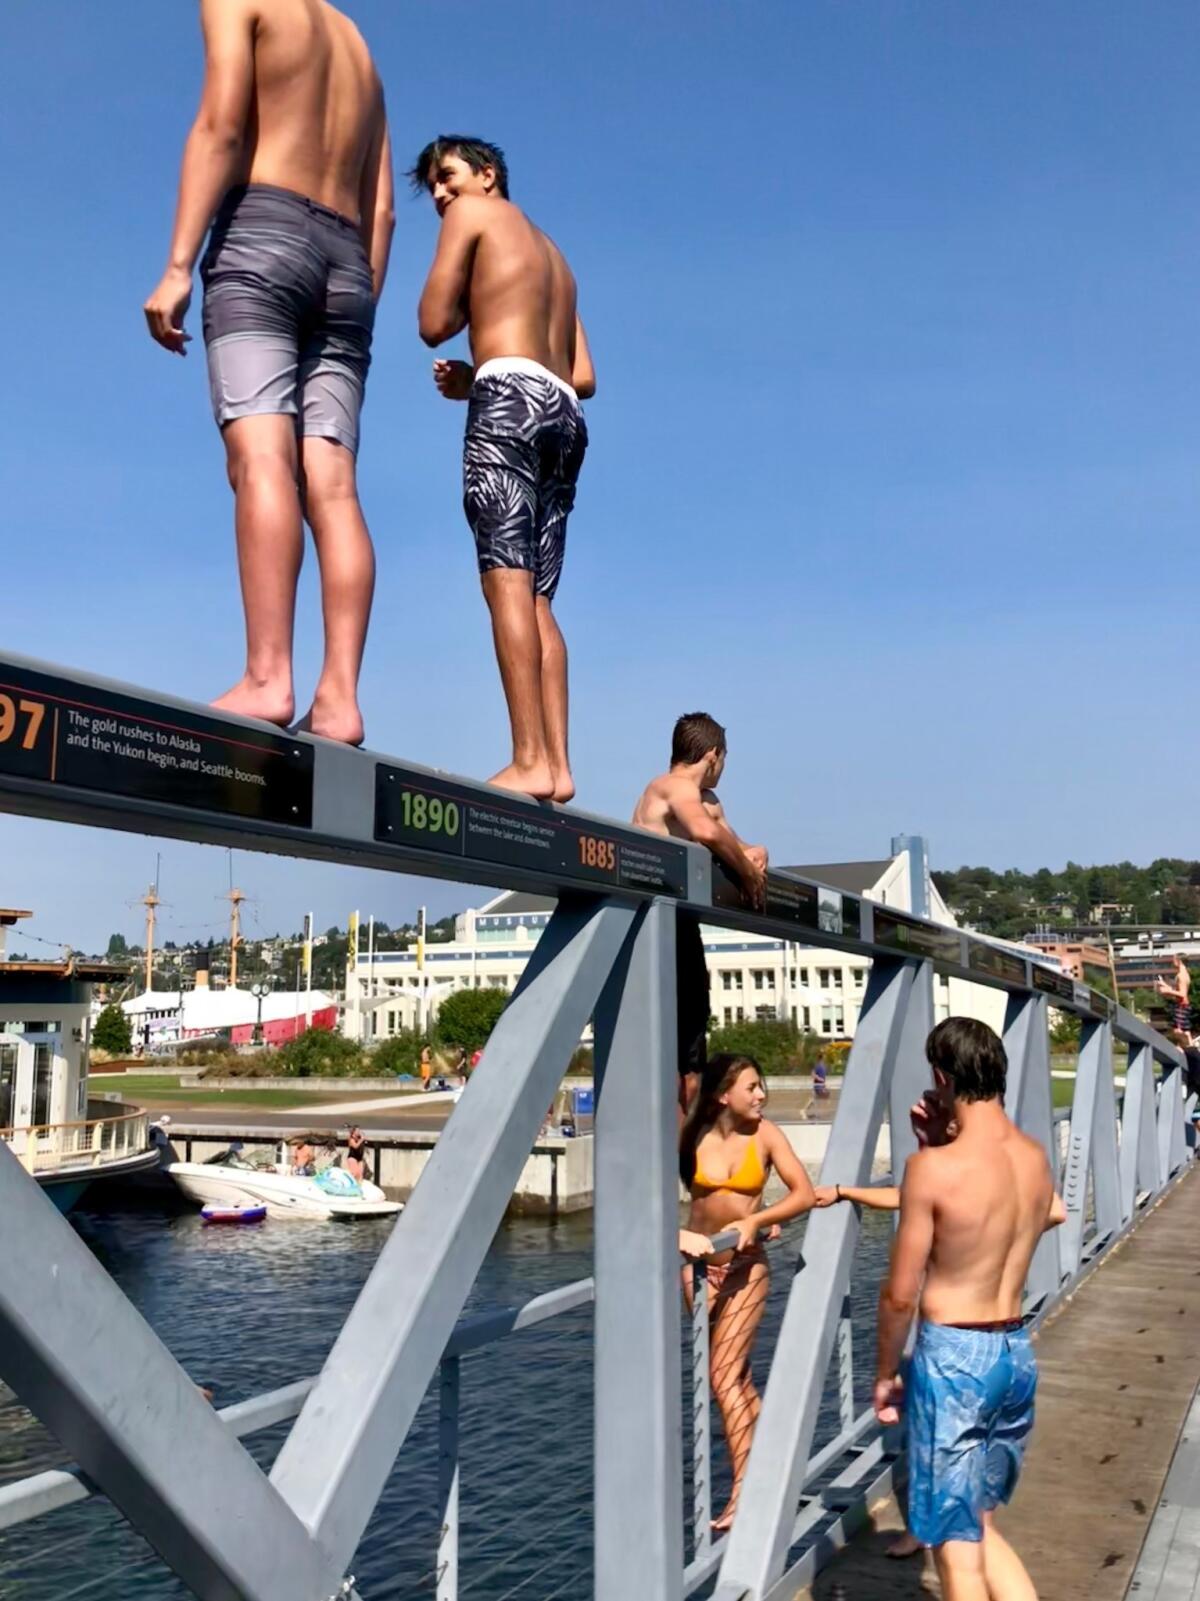 Readers photo issue 2018-- Lake Union, SeattleThomas Brod, Los AngelesOn Aug. 10, Brod and his family were at Lake Union in Seattle, "waiting for a float plane to take us over to San Juan Island." While they waited, Brod spotted a bunch of teens taking turns jumping into the lake. He got the shot with his iPhone X.